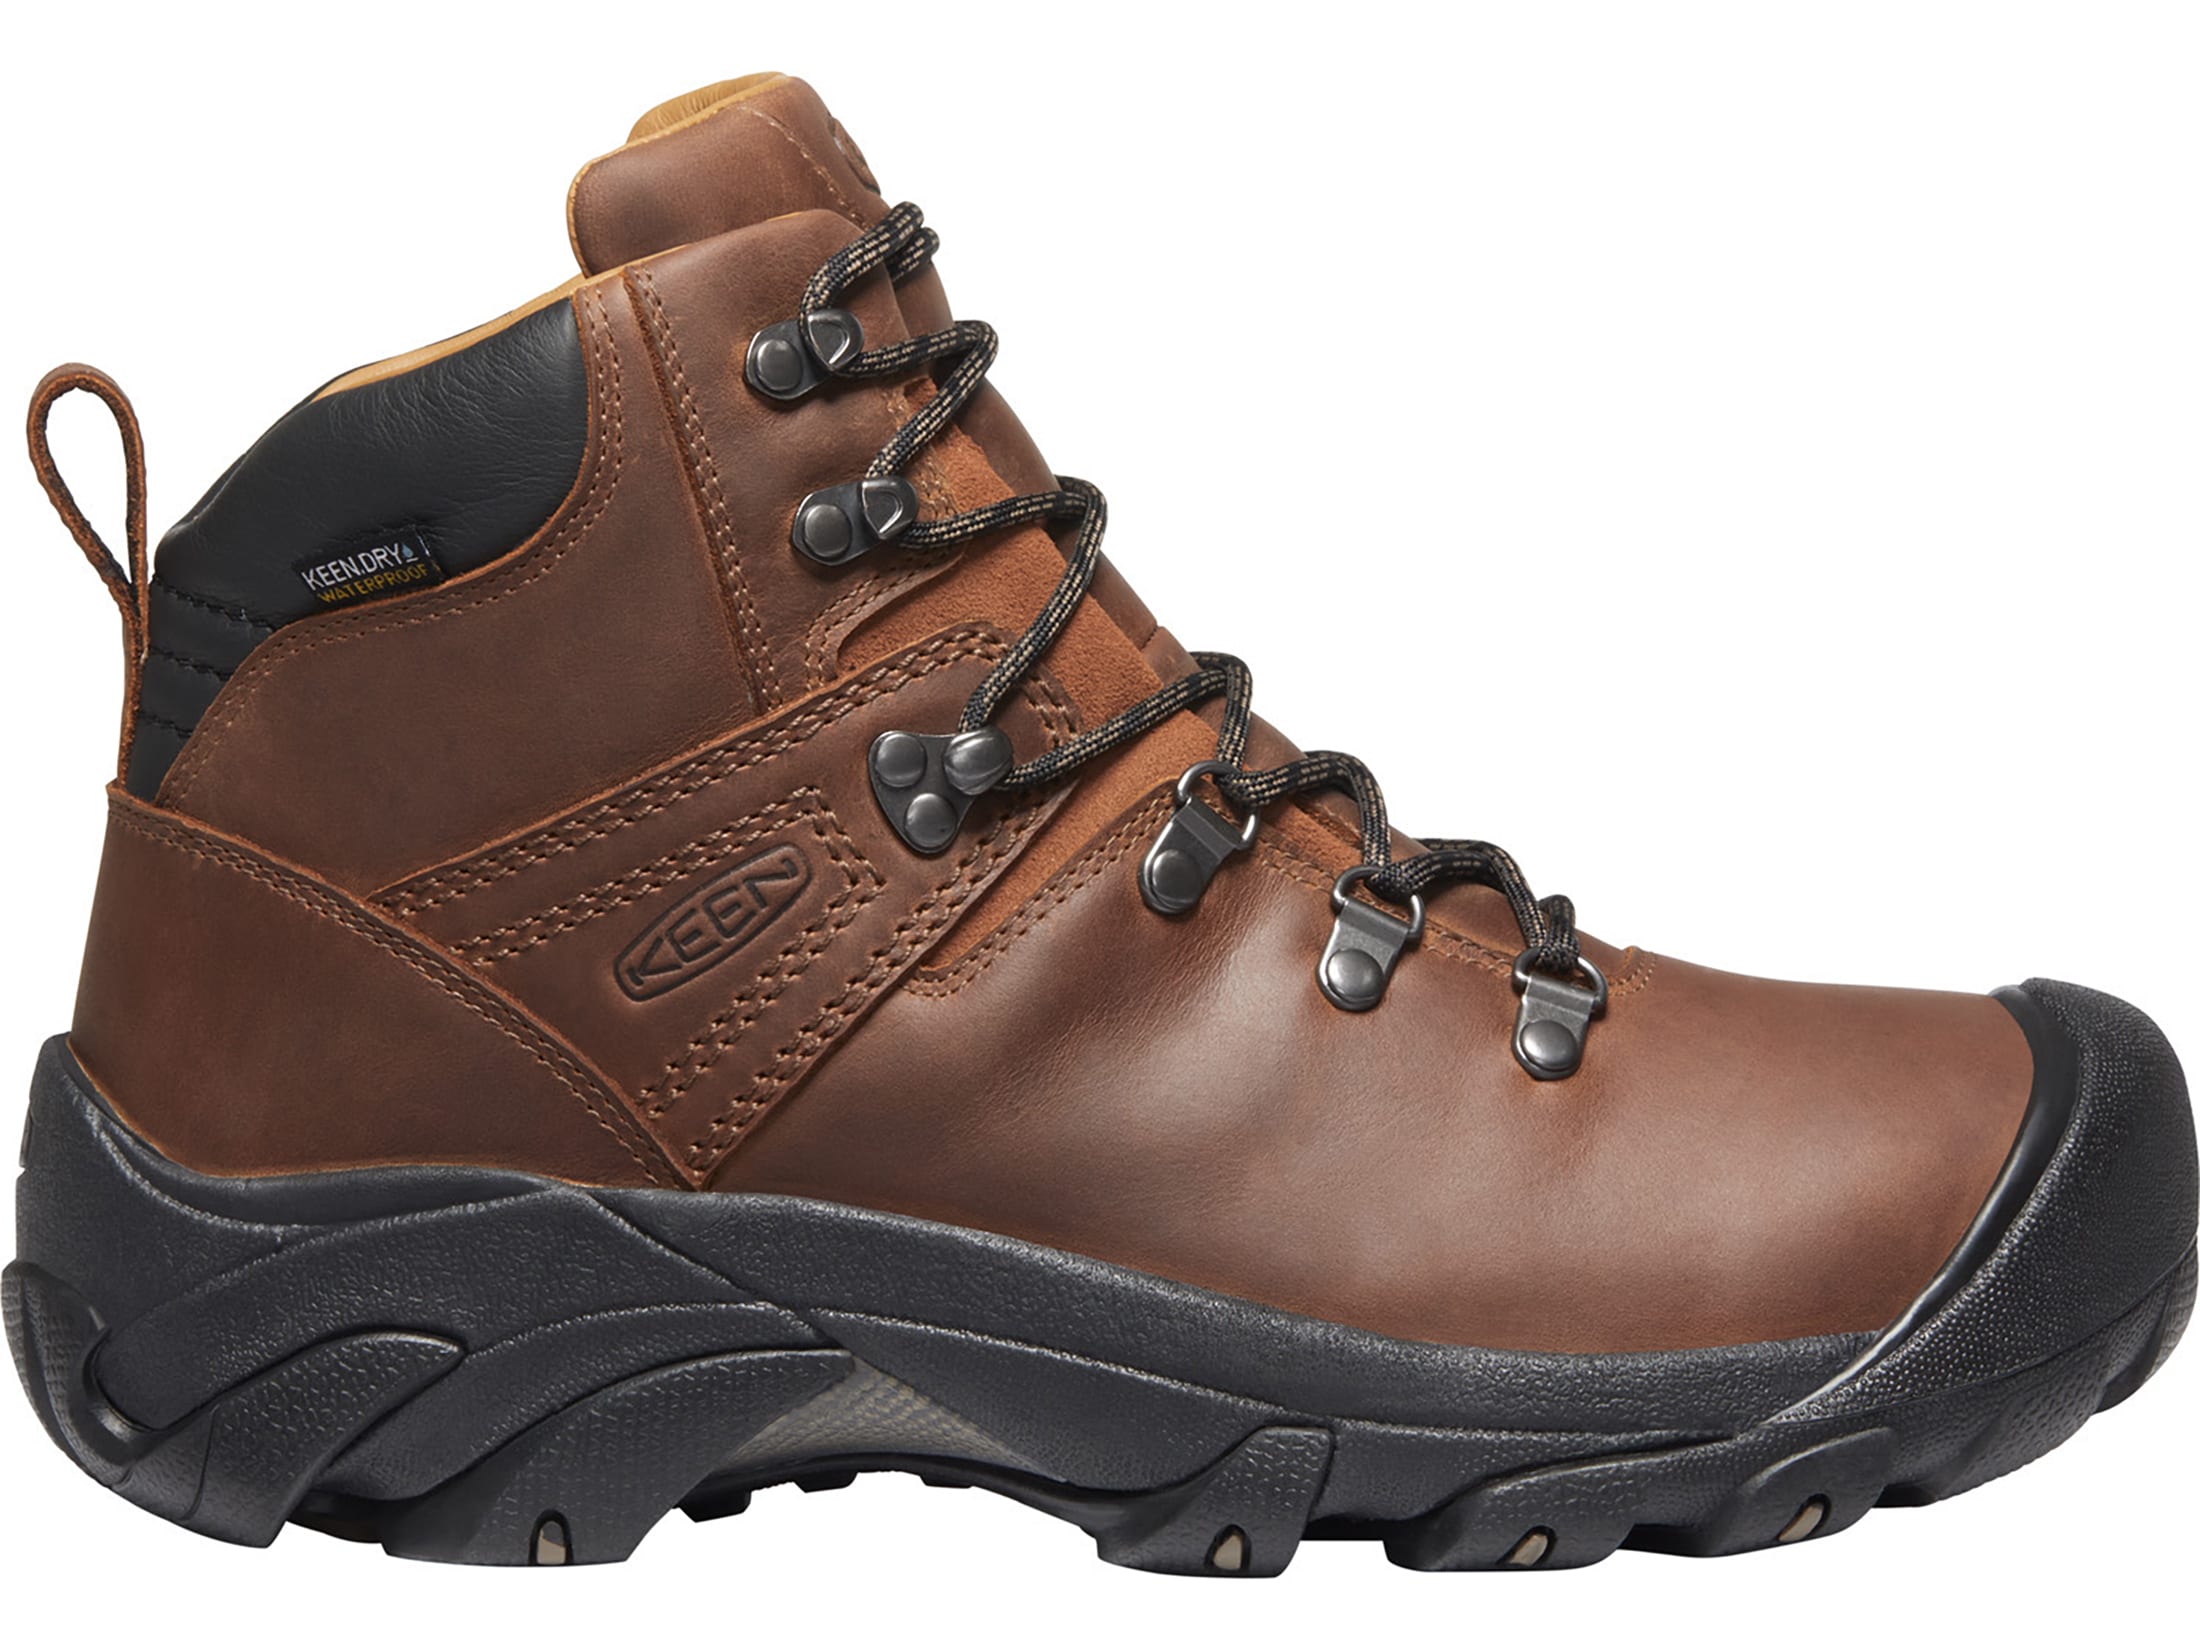 Keen Pyrenees Hiking Boots Leather/Synthetic Syrup Men's 10.5 D